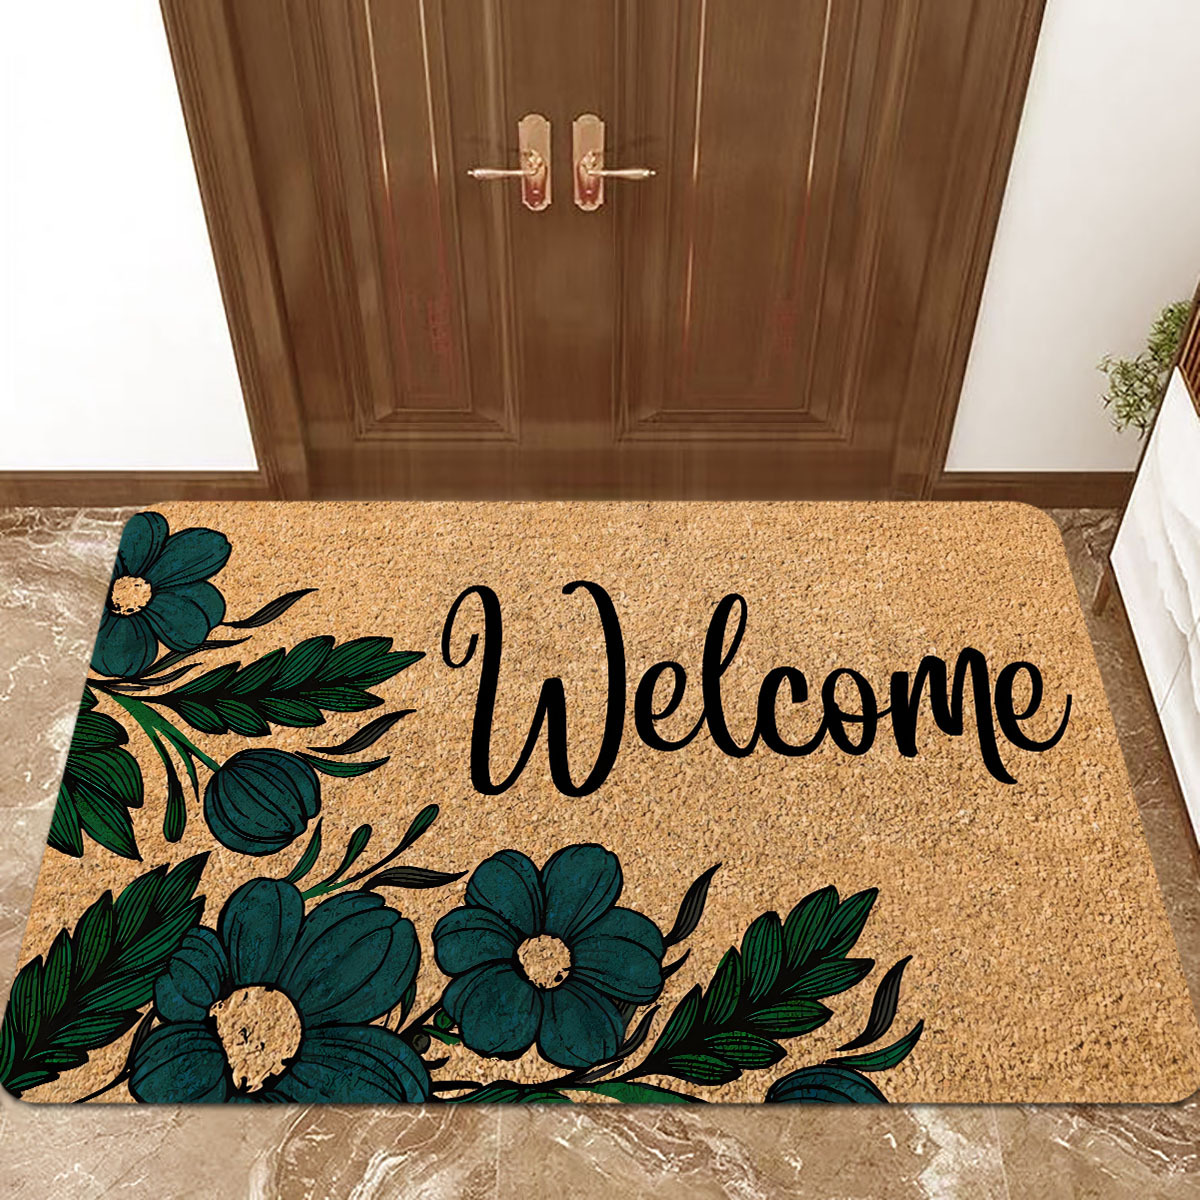 

1pc, Entrance Area Floor Mat, Welcome Home Floral Elements Printed Pattern Rug, Polyester Non-slip Stain Resistant Soft Floor Mat For Indoor Outdoor Entrance Floor Doormat Quick Drying